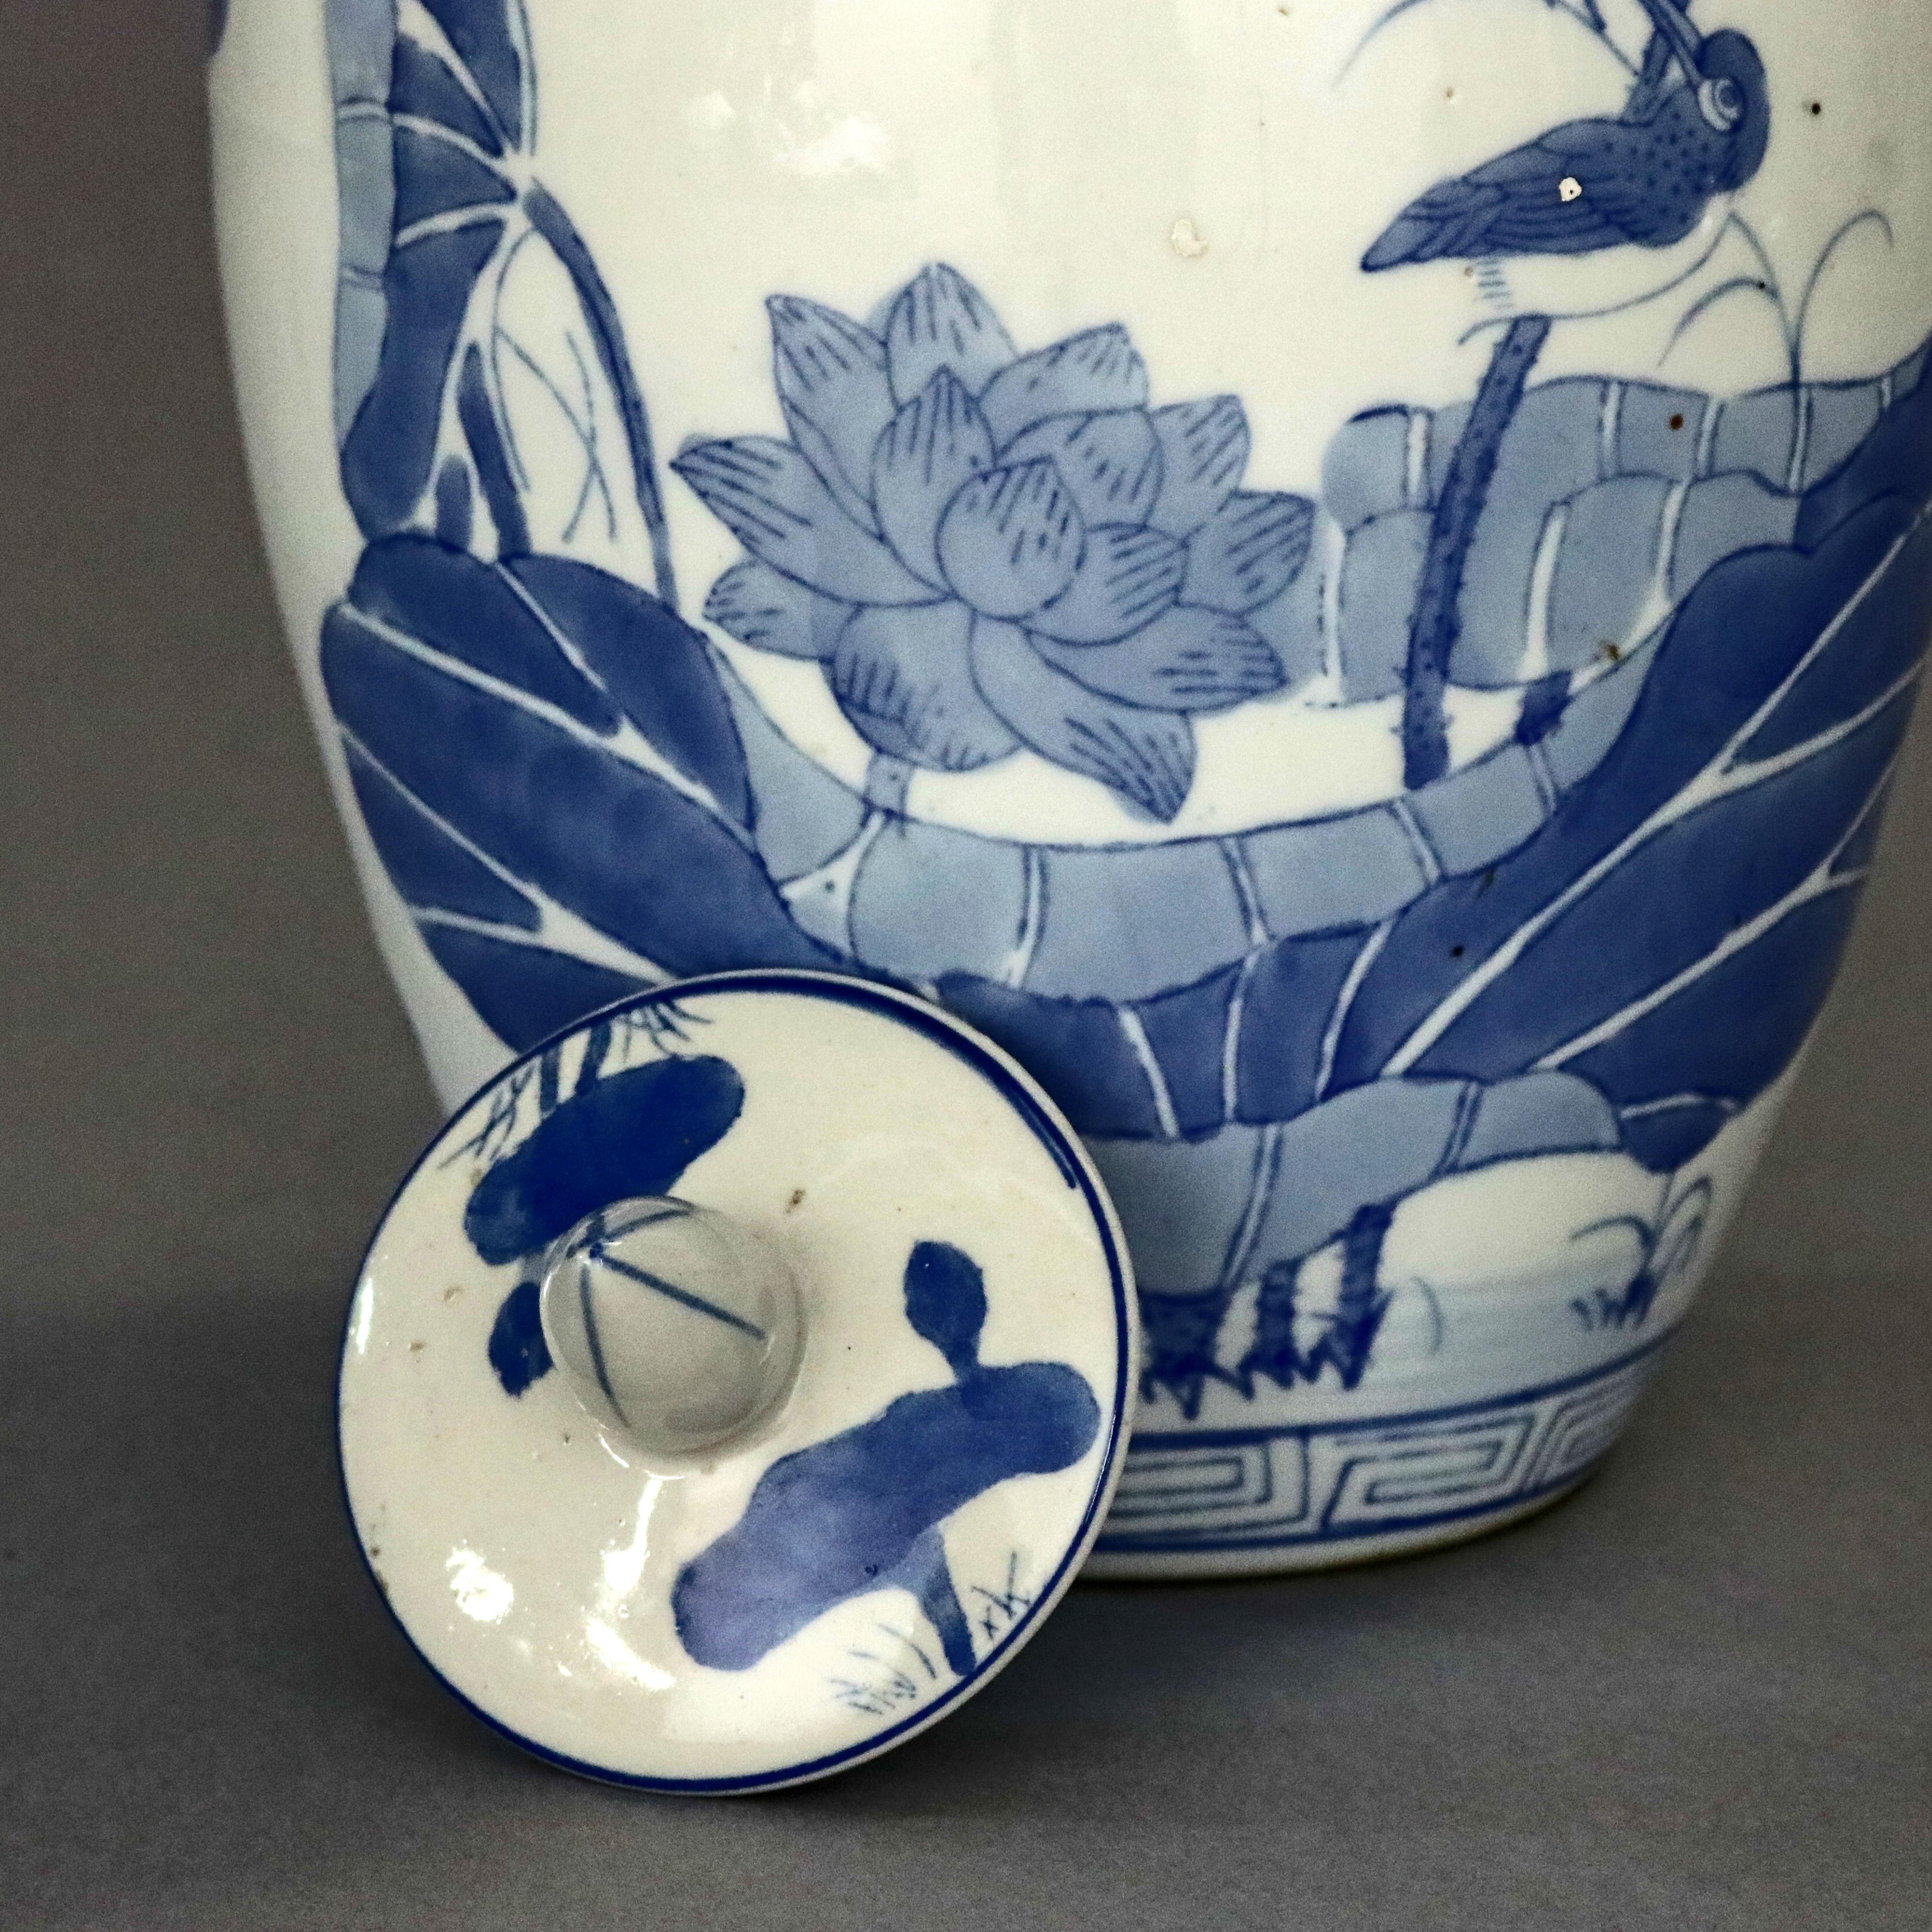 Glazed Chinese Blue and White Pictorial Porcelain Jar with Marsh Scene, 20th Century